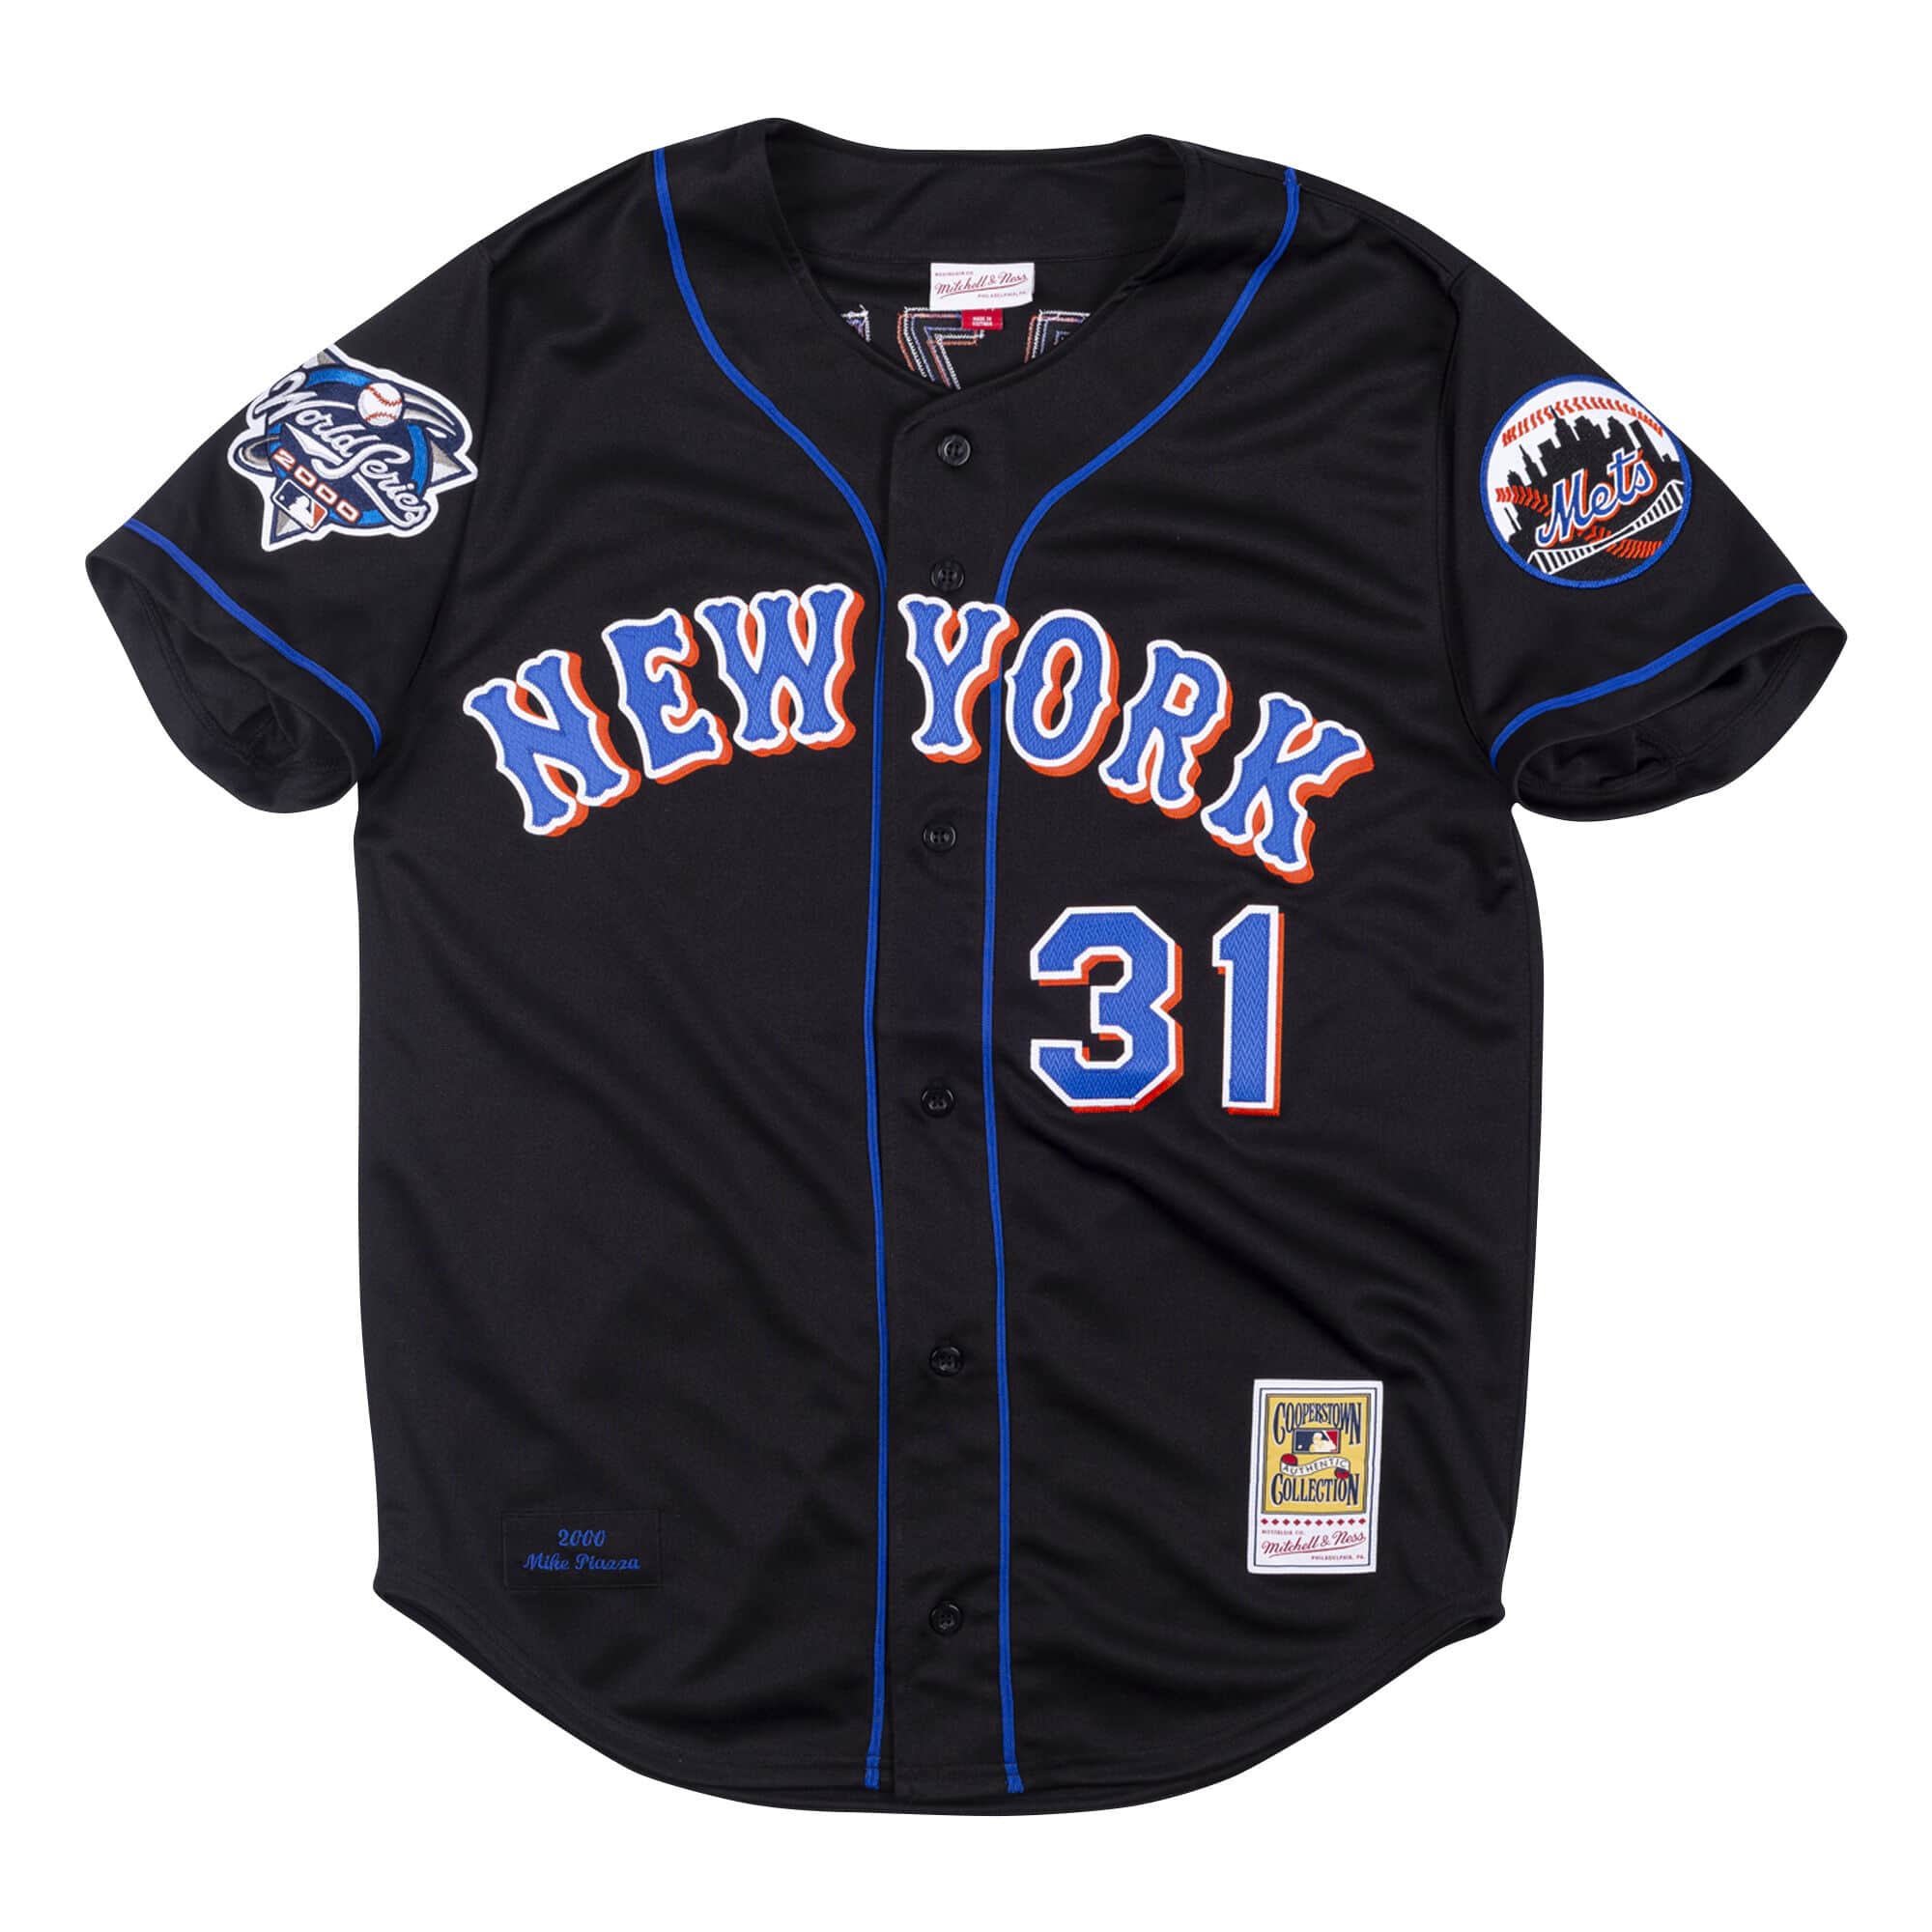 Product Mitchell & Ness Authentic New York Mets 2000 Mike Piazza Jersey